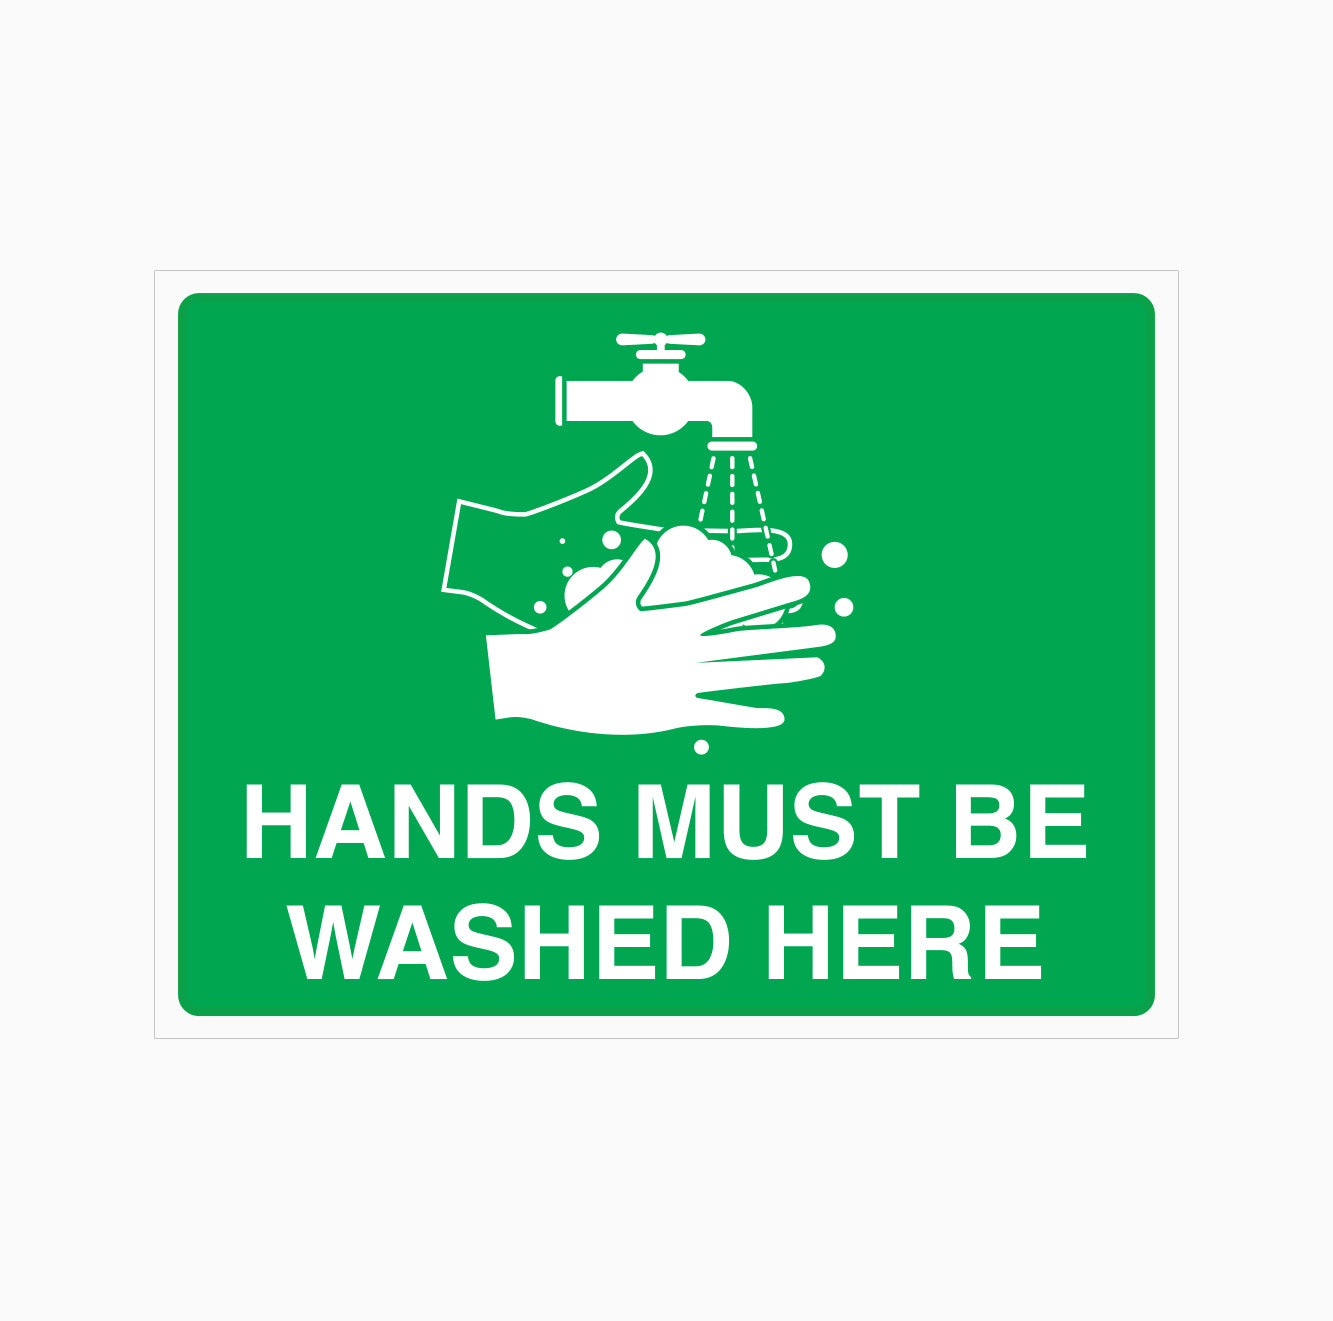 HANDS MUST BE WASHED HERE SIGN